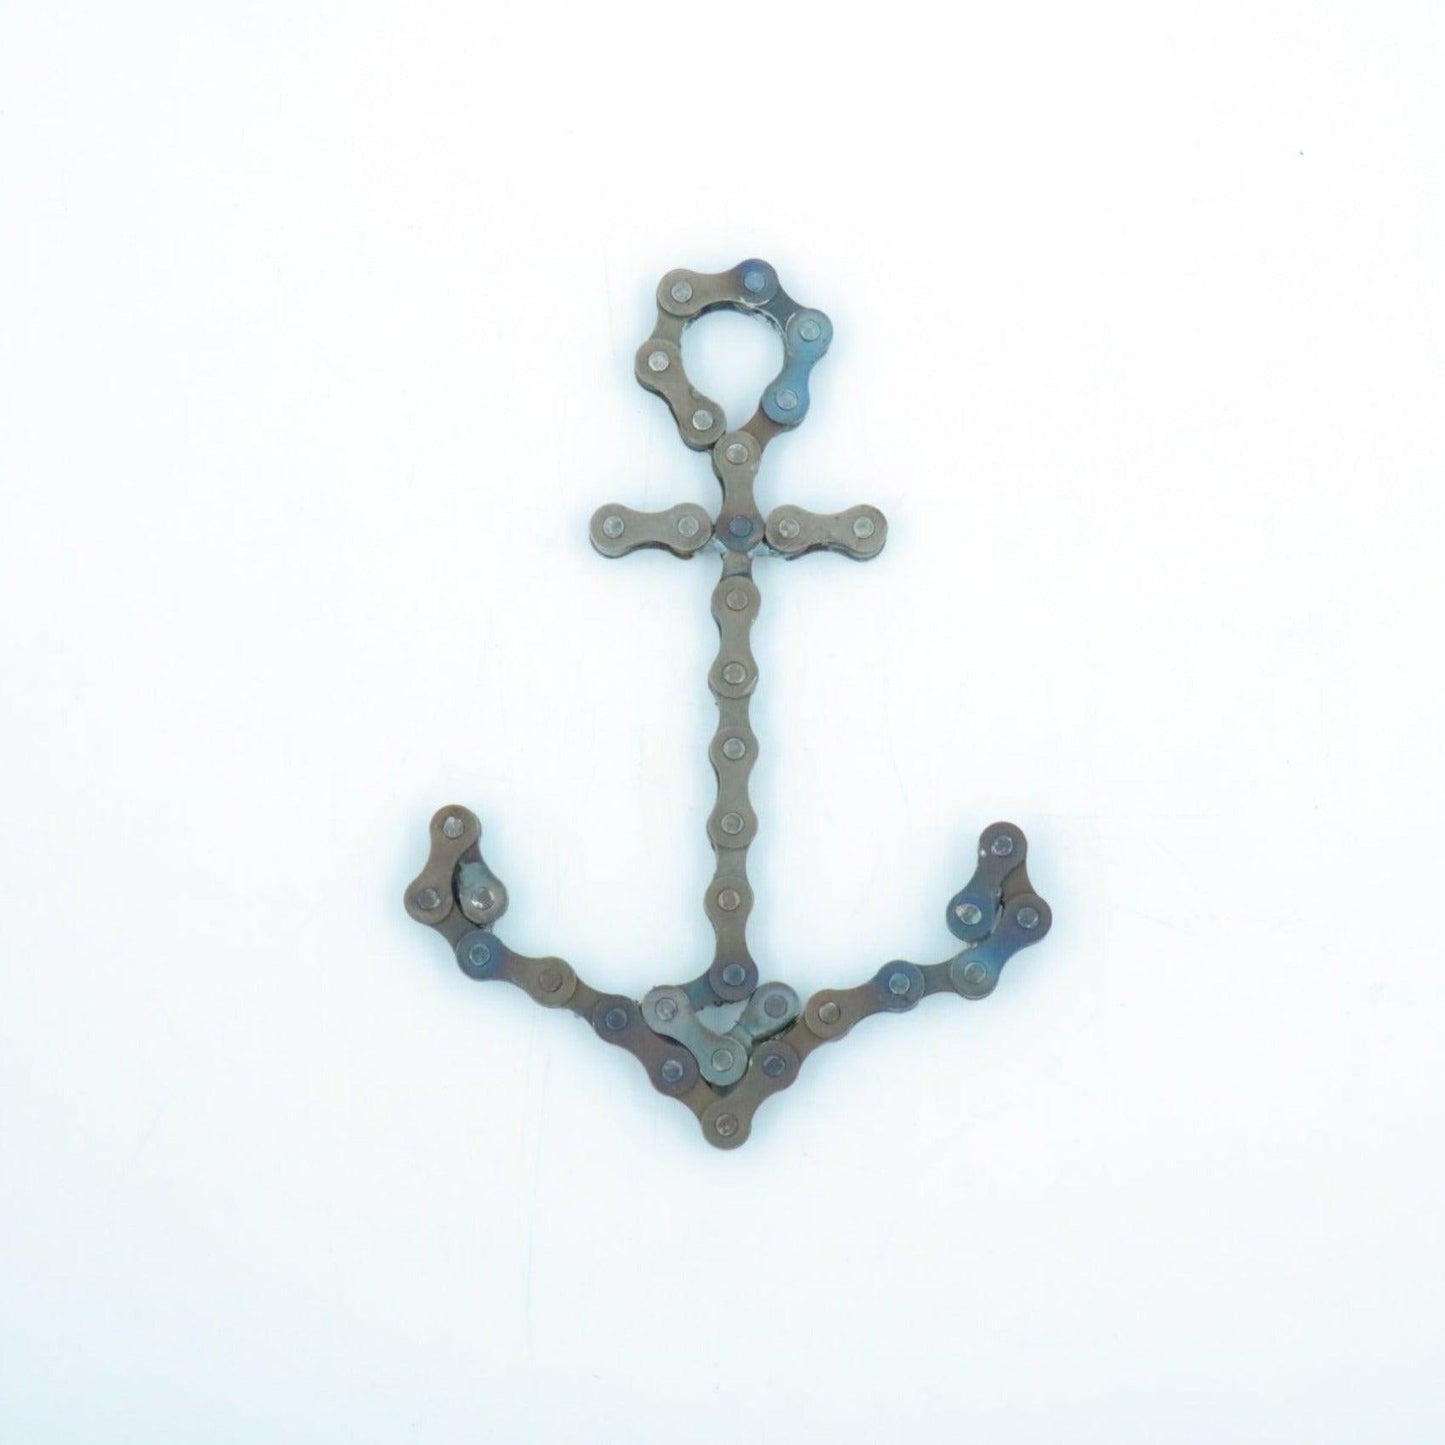 Anchor Sculpture | UNCHAINED by NIRIT LEVAV PACKER